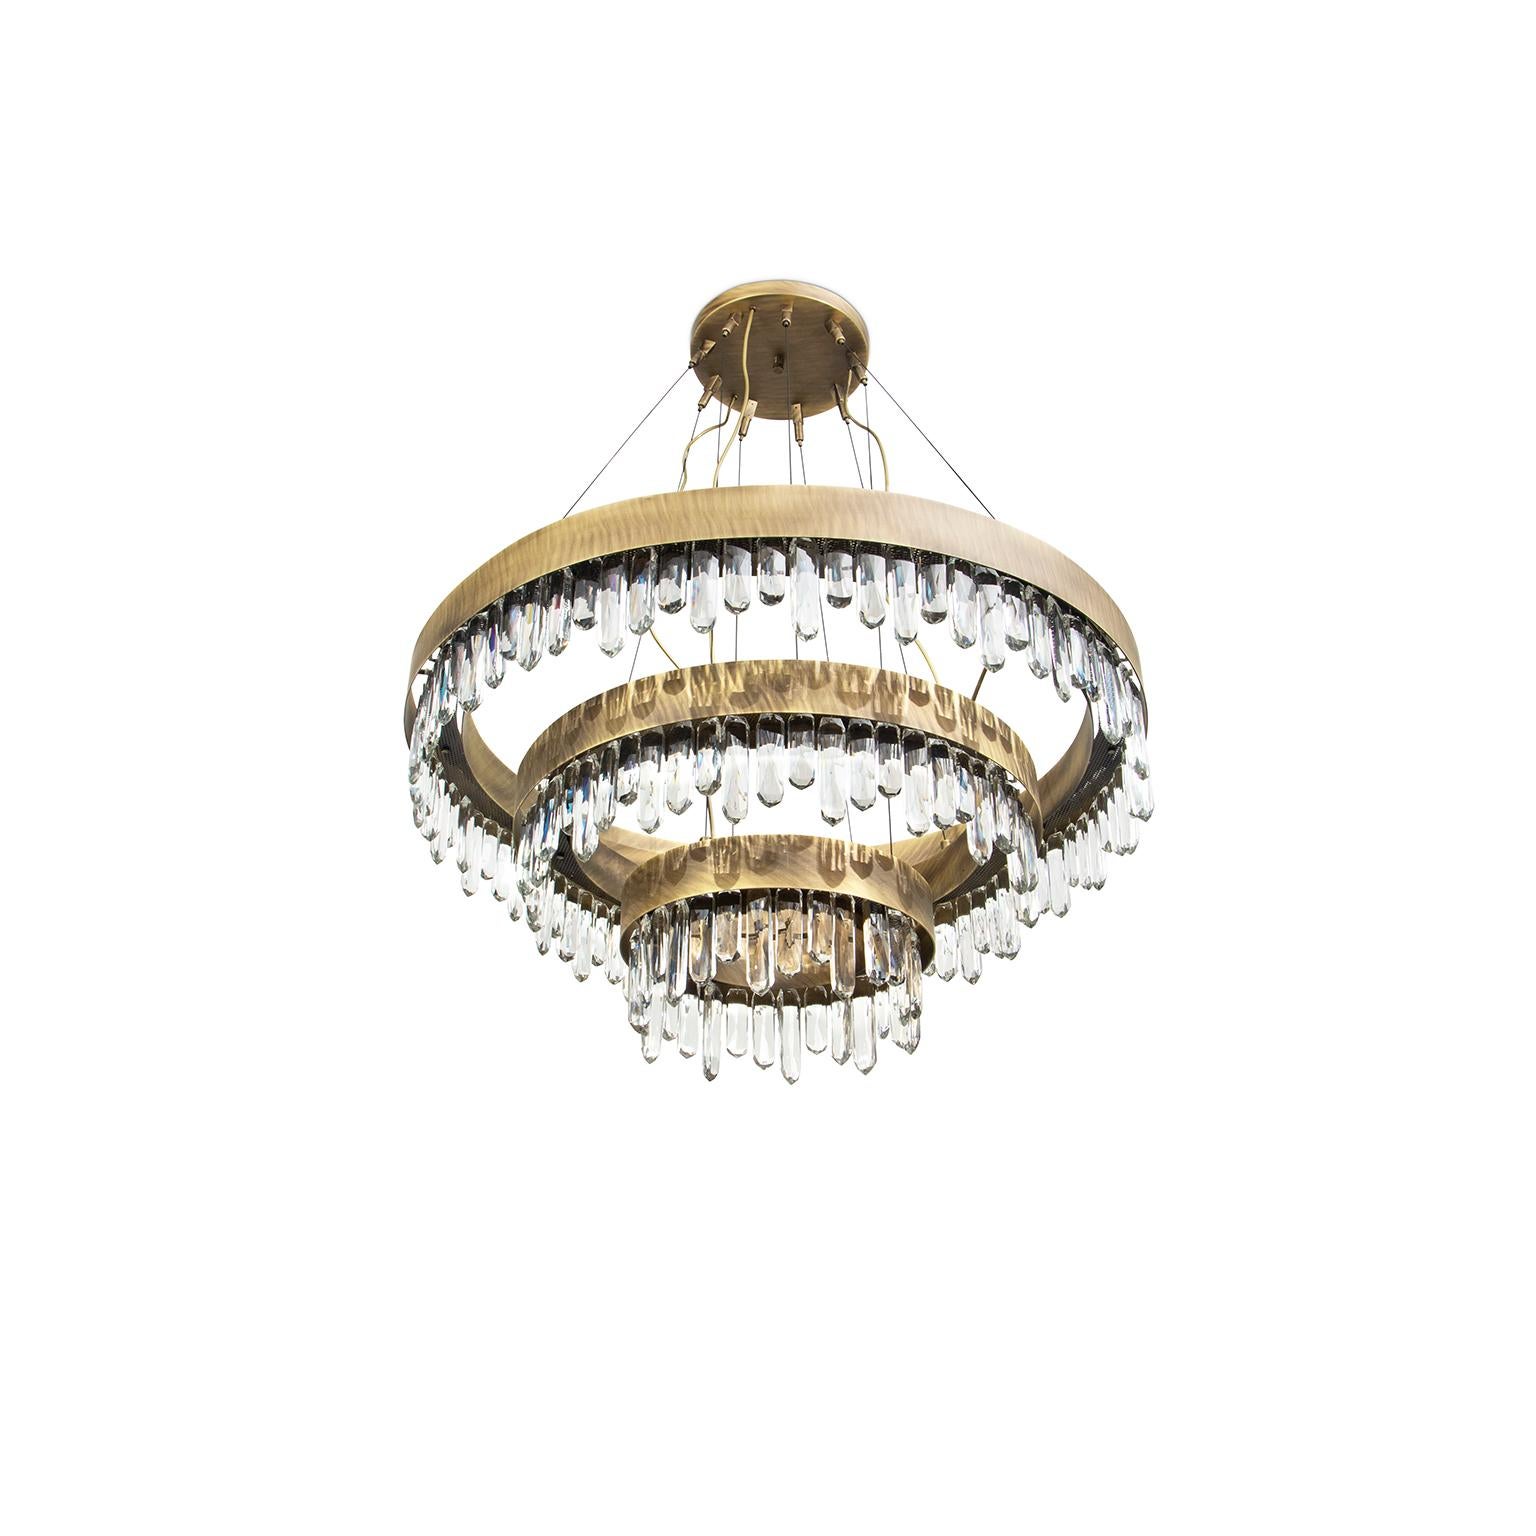 The allure of Mexico’s Giant Crystal Cave was the inspiration for NAICCA Chandelier, a round chandelier that represents the legend of crystal origins. The aged brushed brass structure and the Quartz crystal diffuser merge together to brighten any